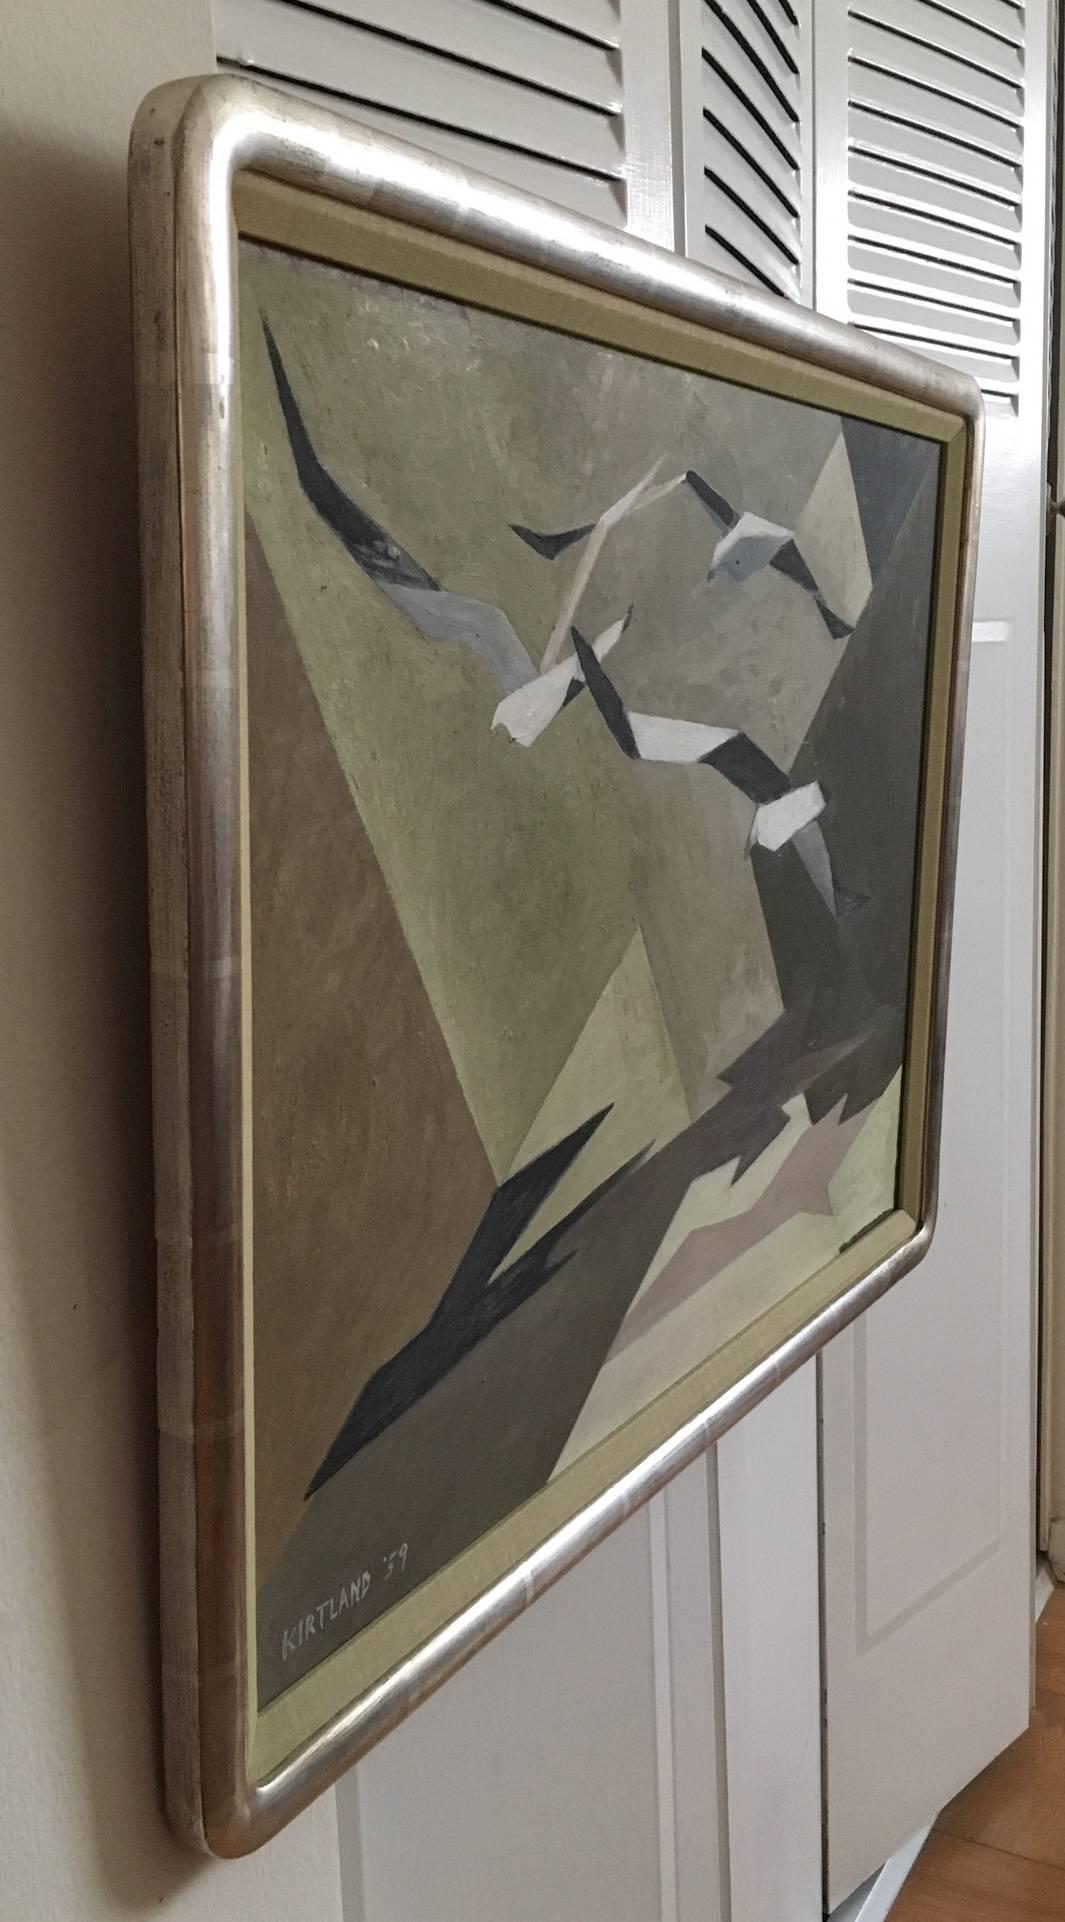 American Modernist Composition of Three Abstract Seagulls, 1959